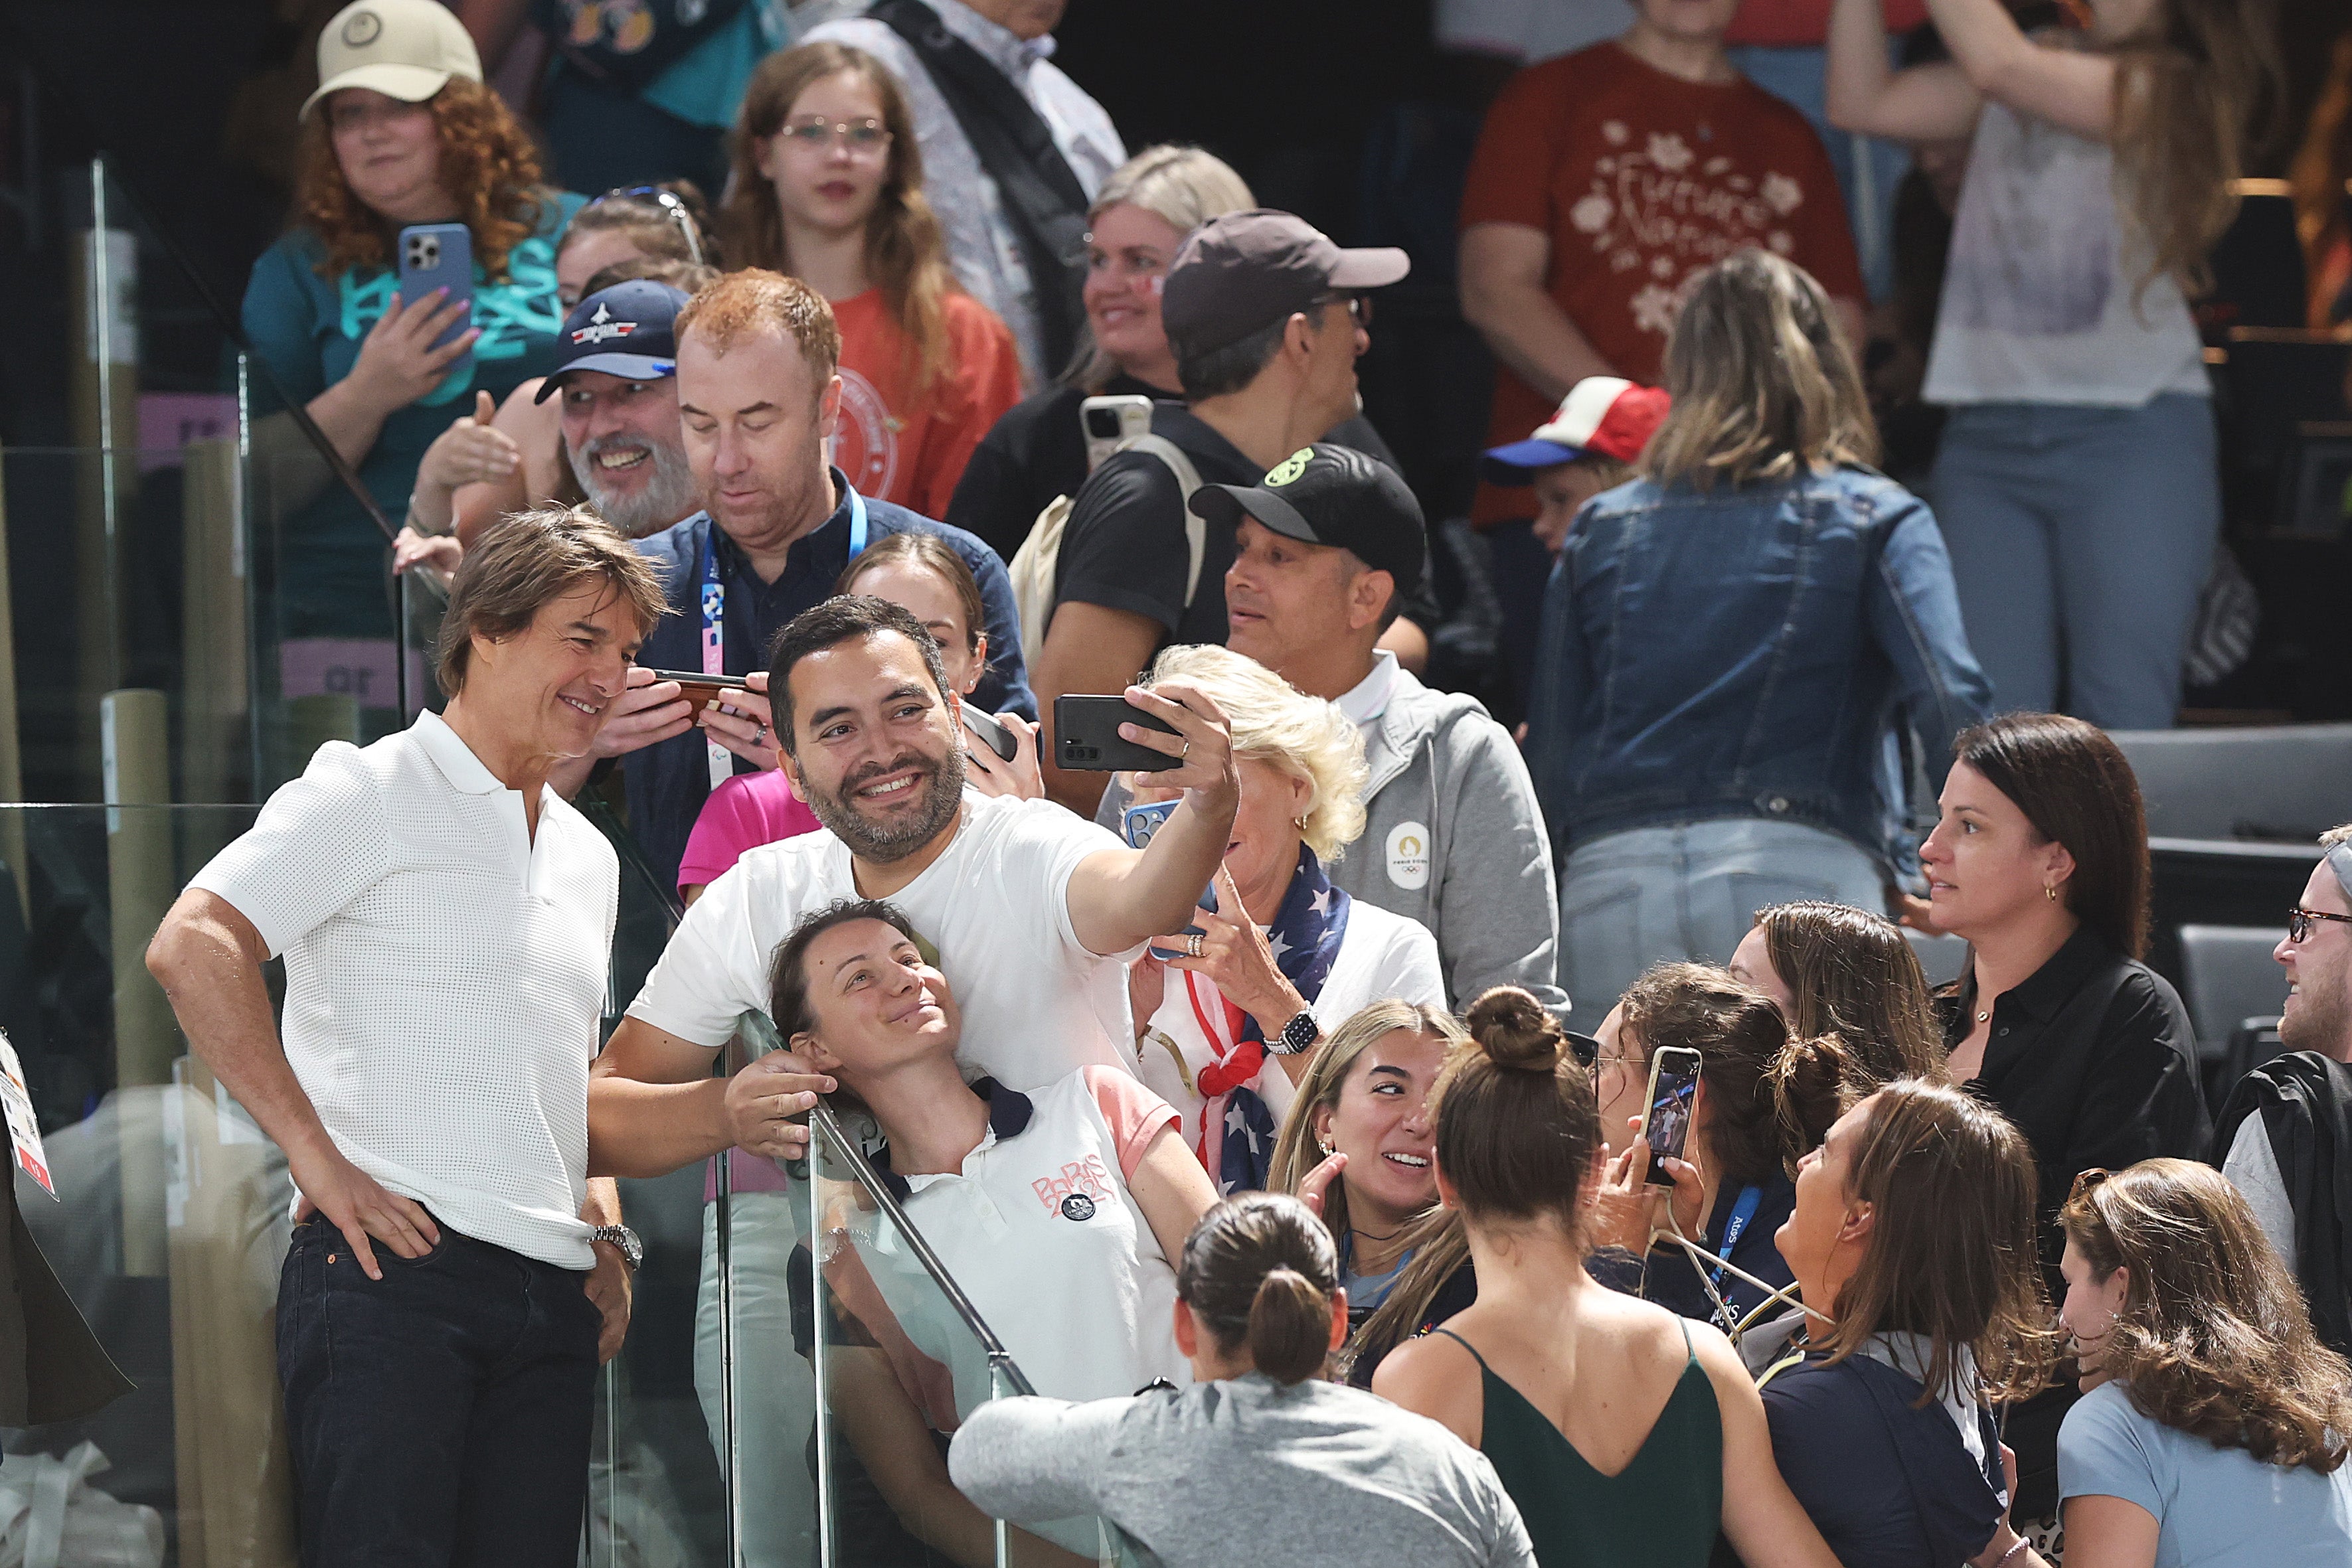 Tom Cruise poses for a selfie with fans